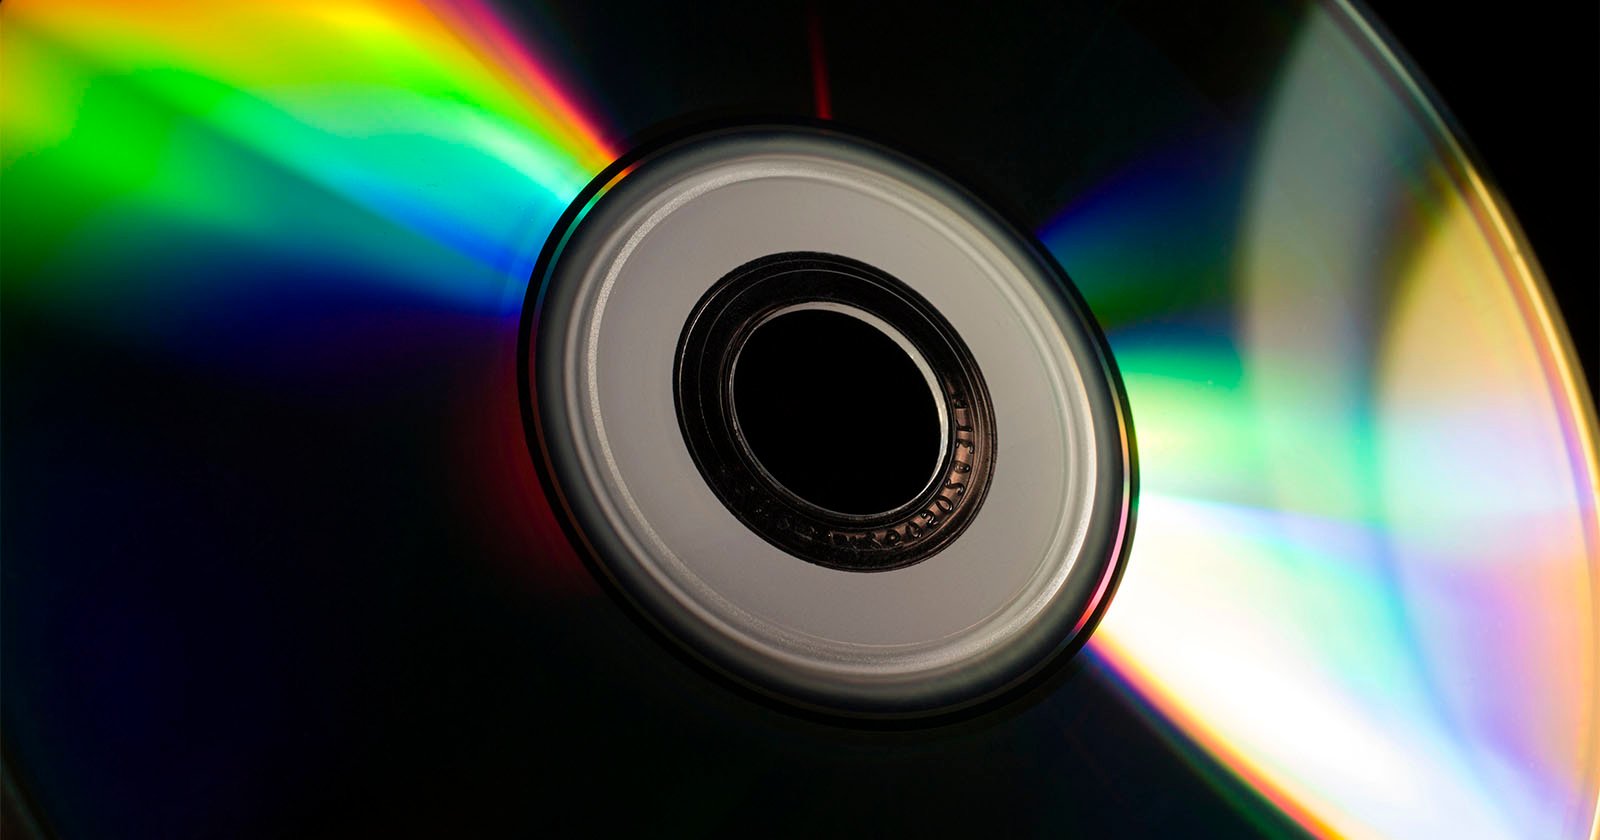  super dvd can hold million photos 